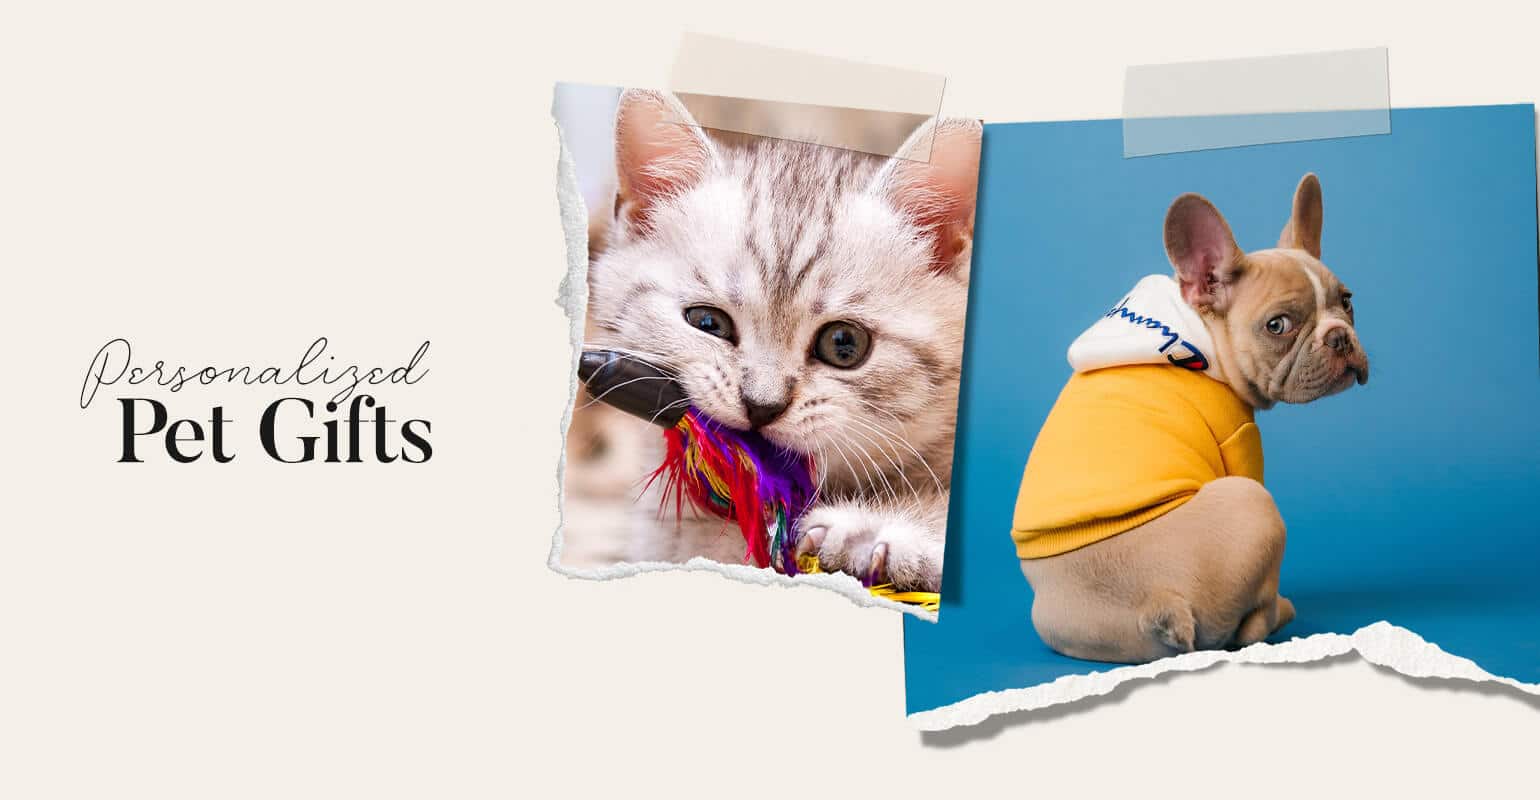 10 Personalized Pet Gifts Because Our Dogs and Cats Deserve the World